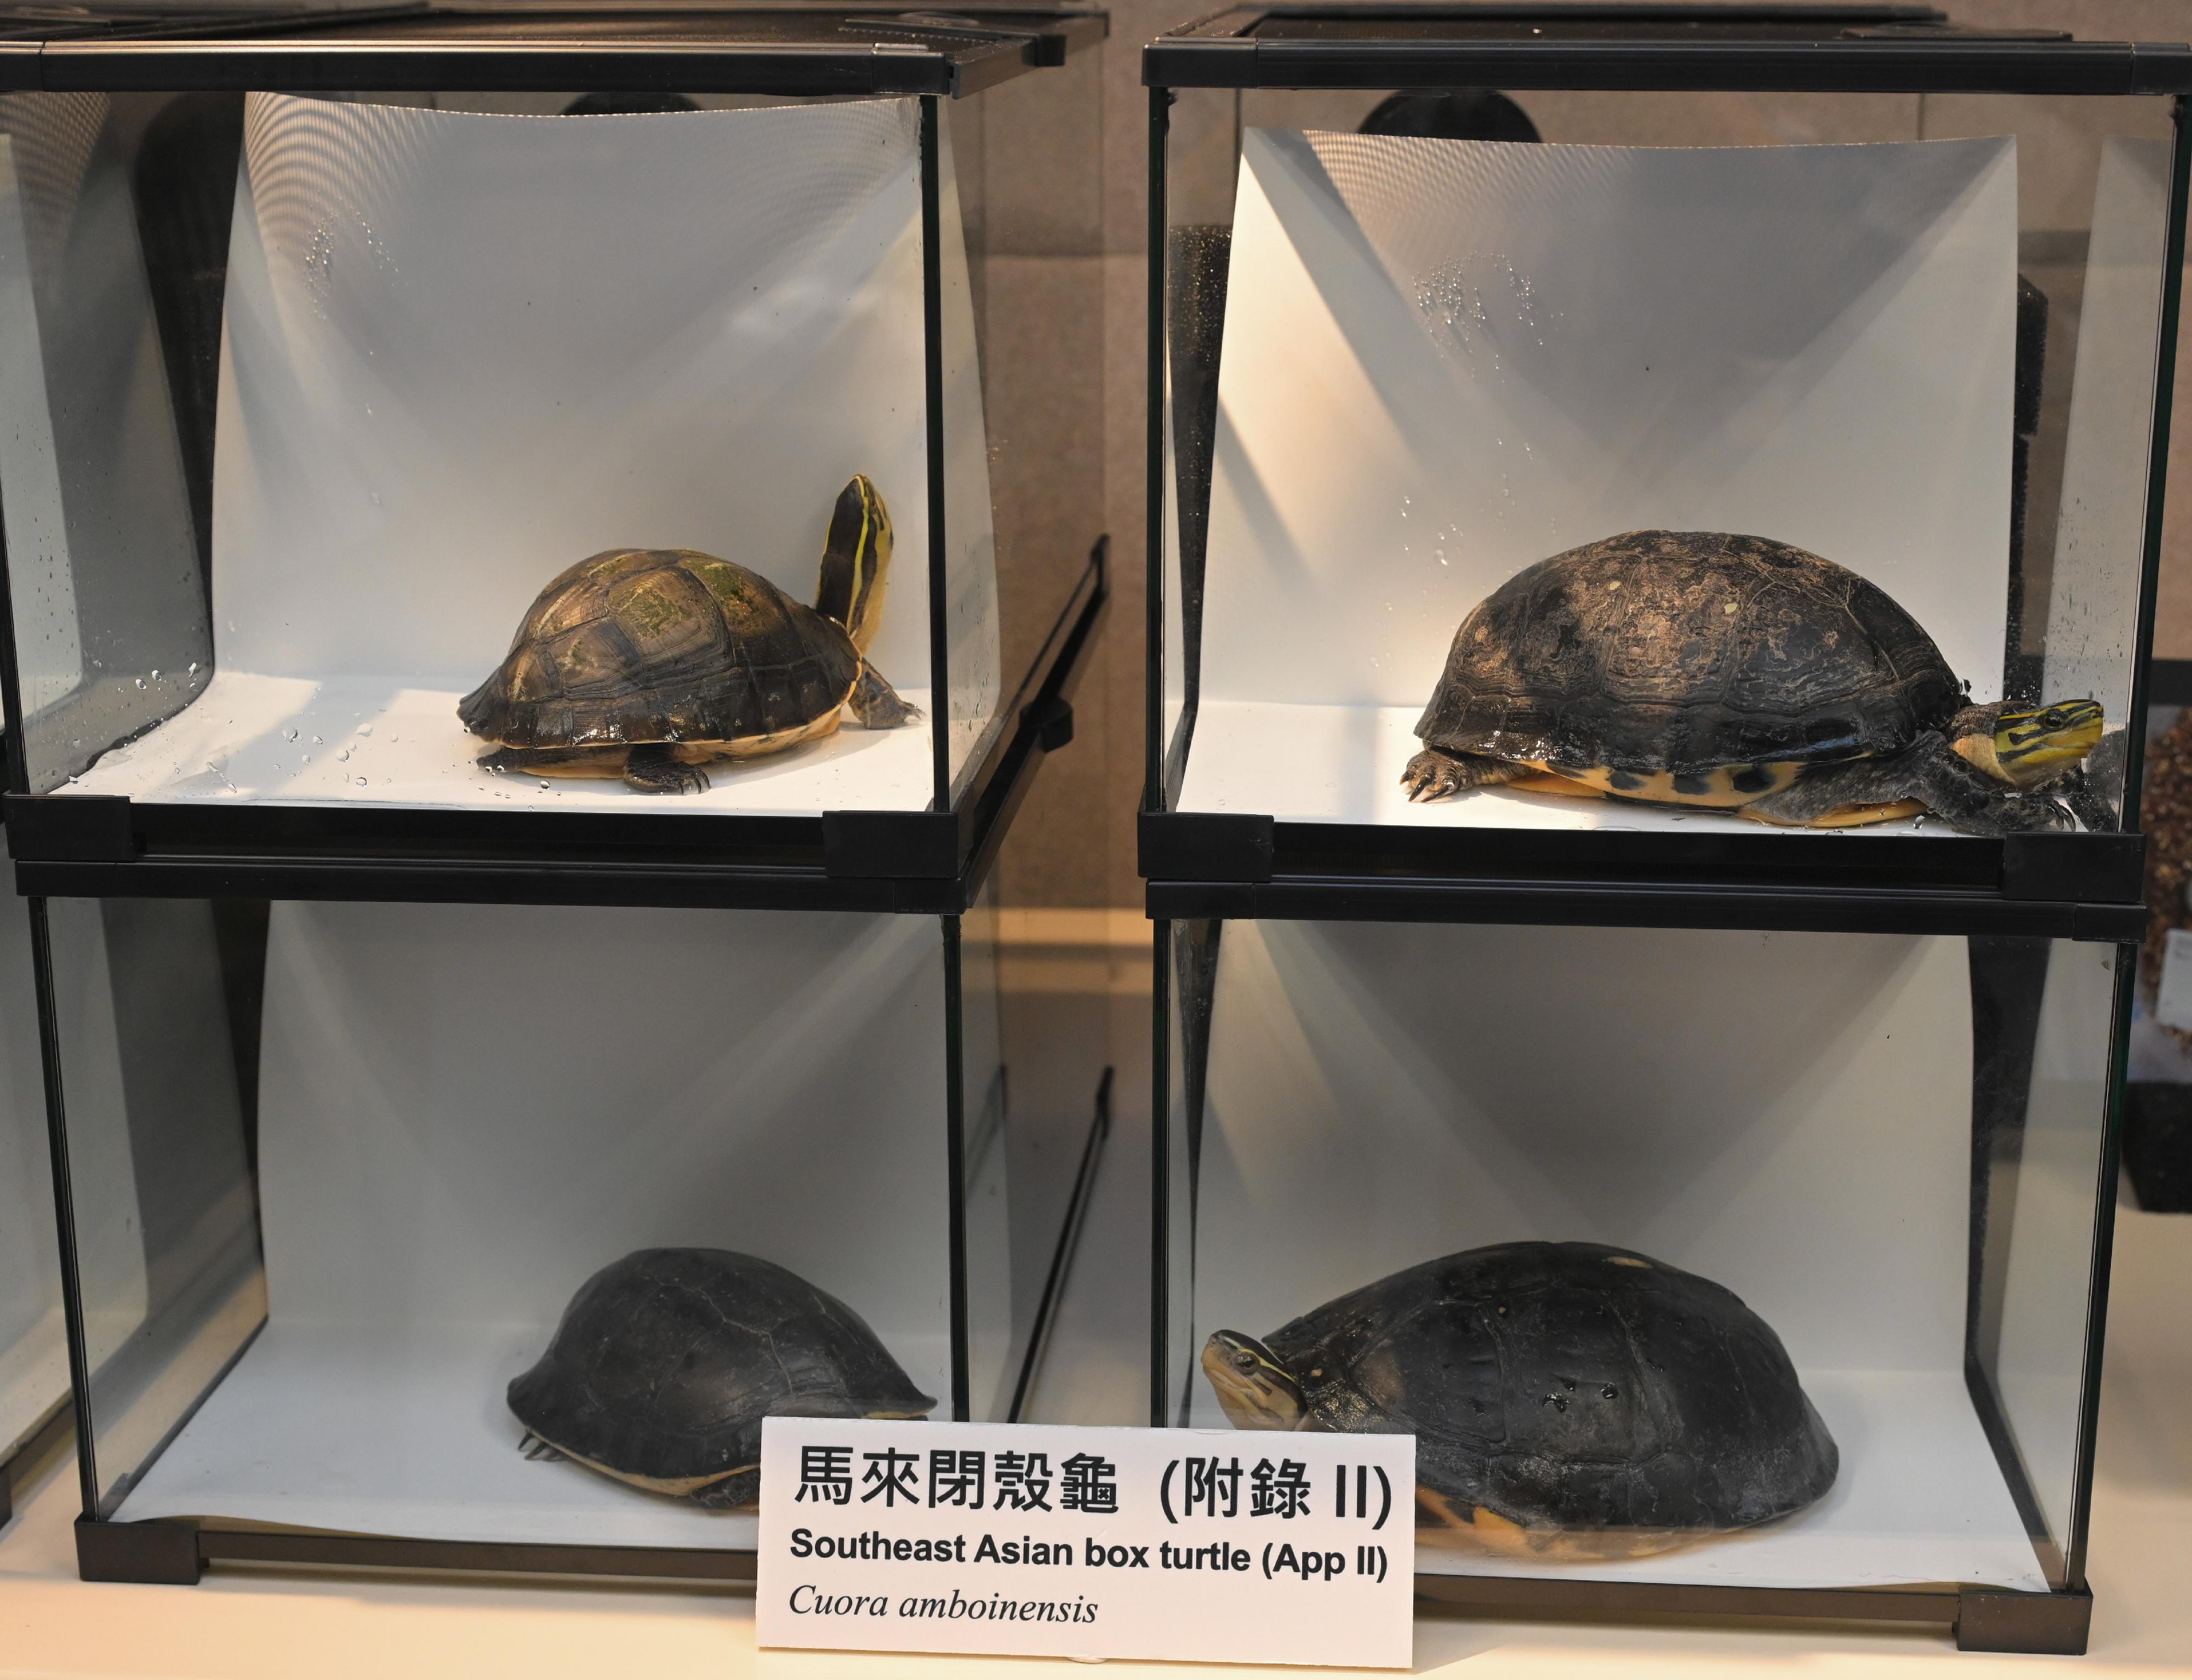 The Agriculture, Fisheries and Conservation Department conducted a joint operation with the Police on July 19. Twenty-nine specimens of endangered turtles, seven suspected turtle eggs and some tools suspected for hunting purposes were seized on some premises in Tai Po and a male suspect was arrested. Photo shows the seized Southeast Asian box turtles (Cuora amboinensis).